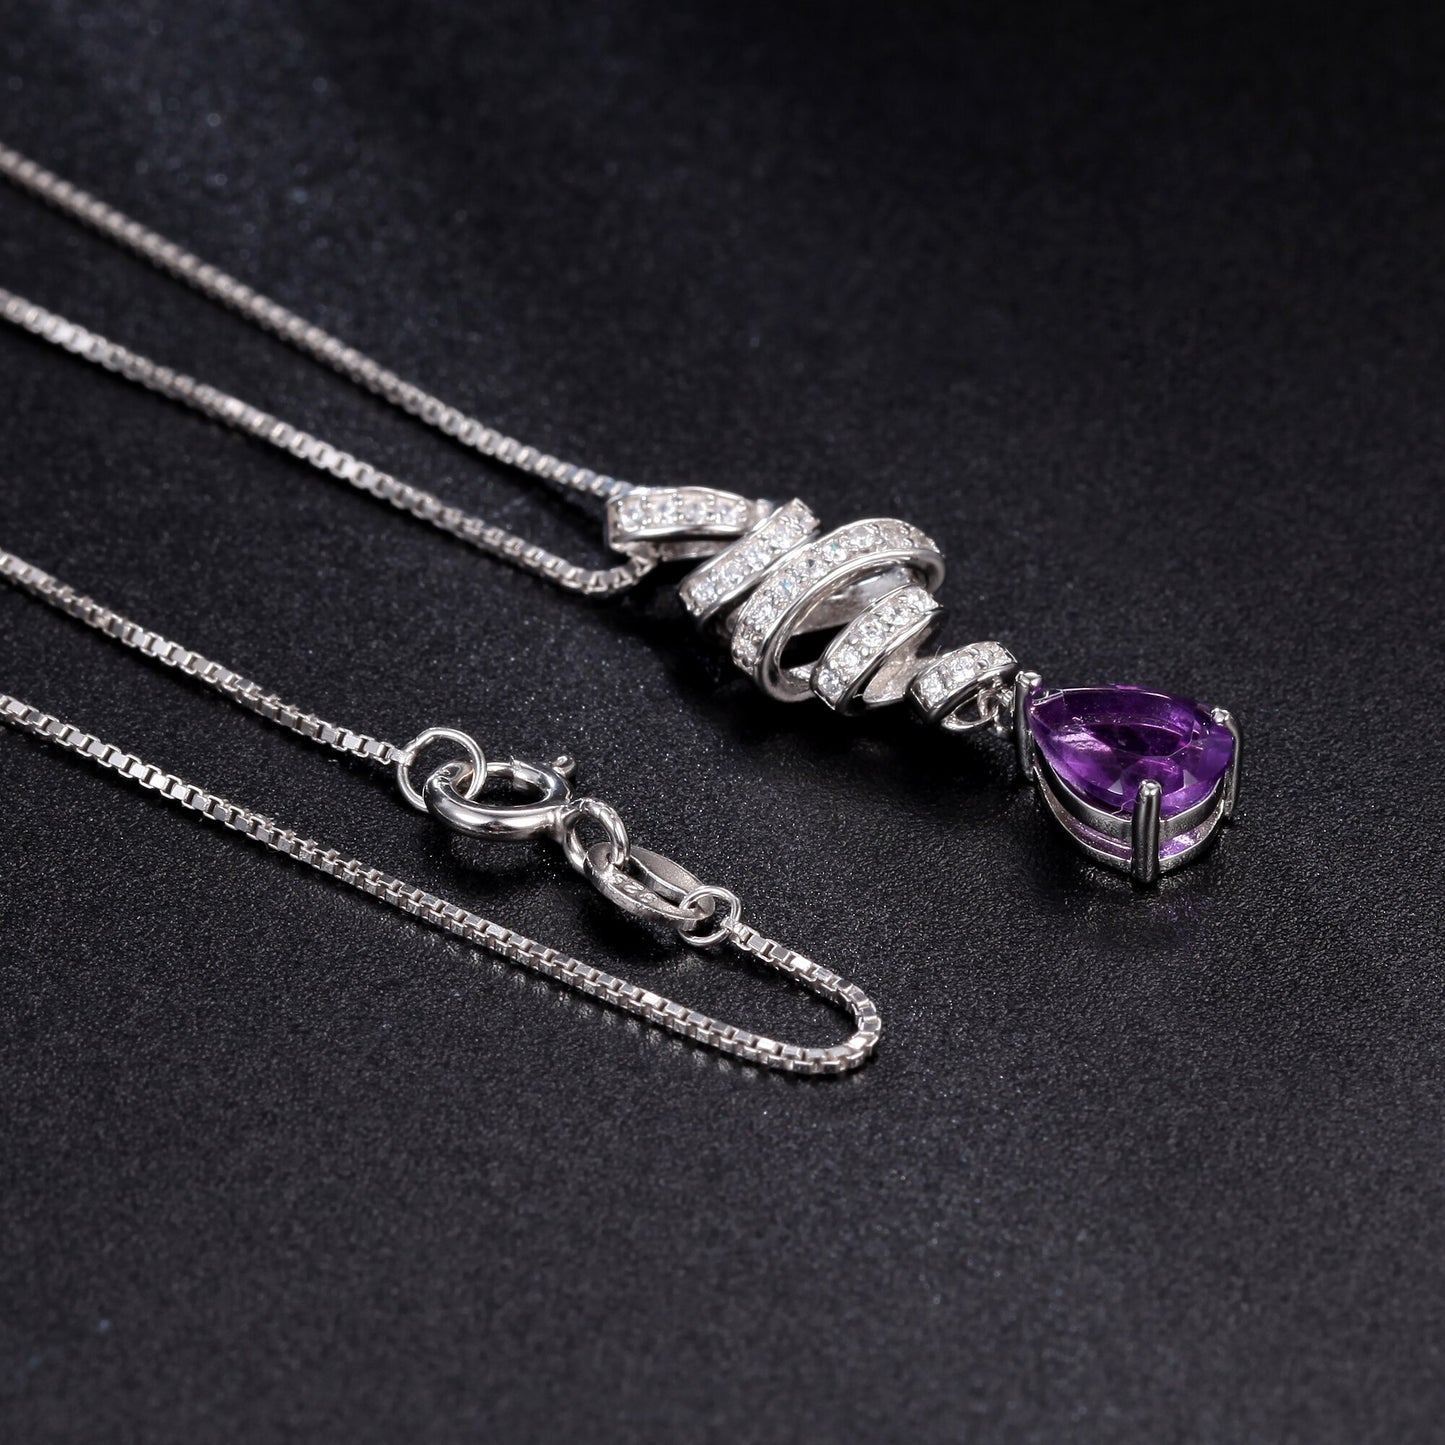 GEM&#39;S BALLET Ribbon Swirl Necklace 6x8mm Pear Shape Natural Amethyst Gemstone Necklace in 925 Stering SIlver Gift For Her